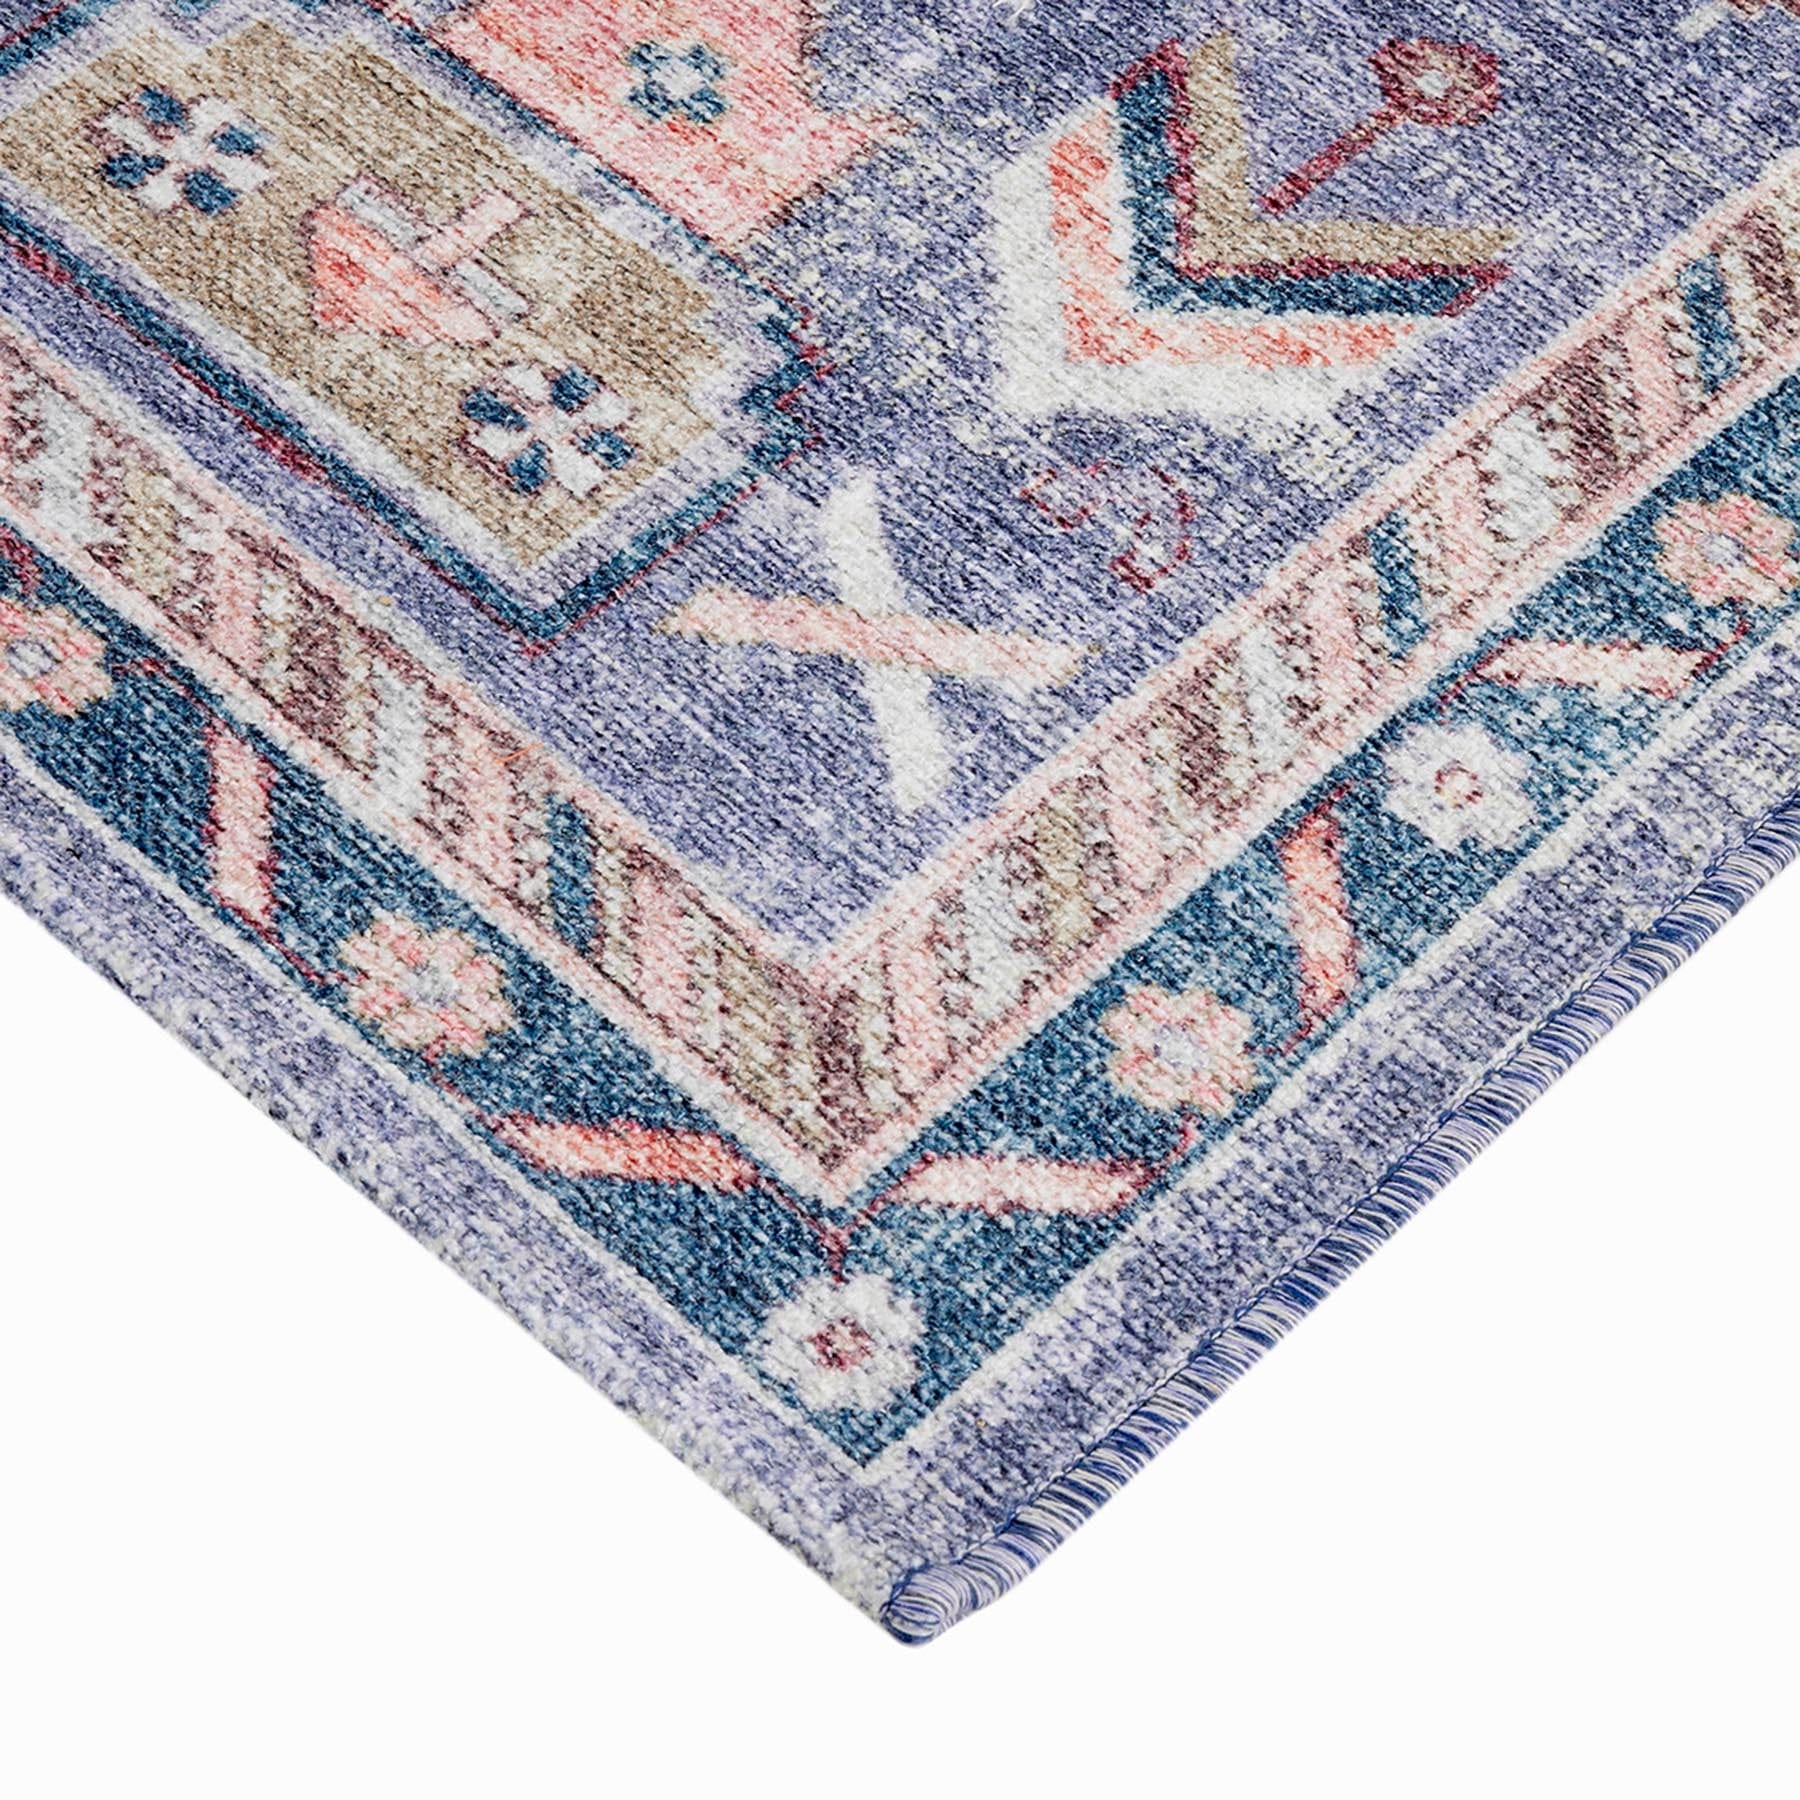 (B828) Blue Floral Medallion Washable Runner, 2x7 - nybusiness